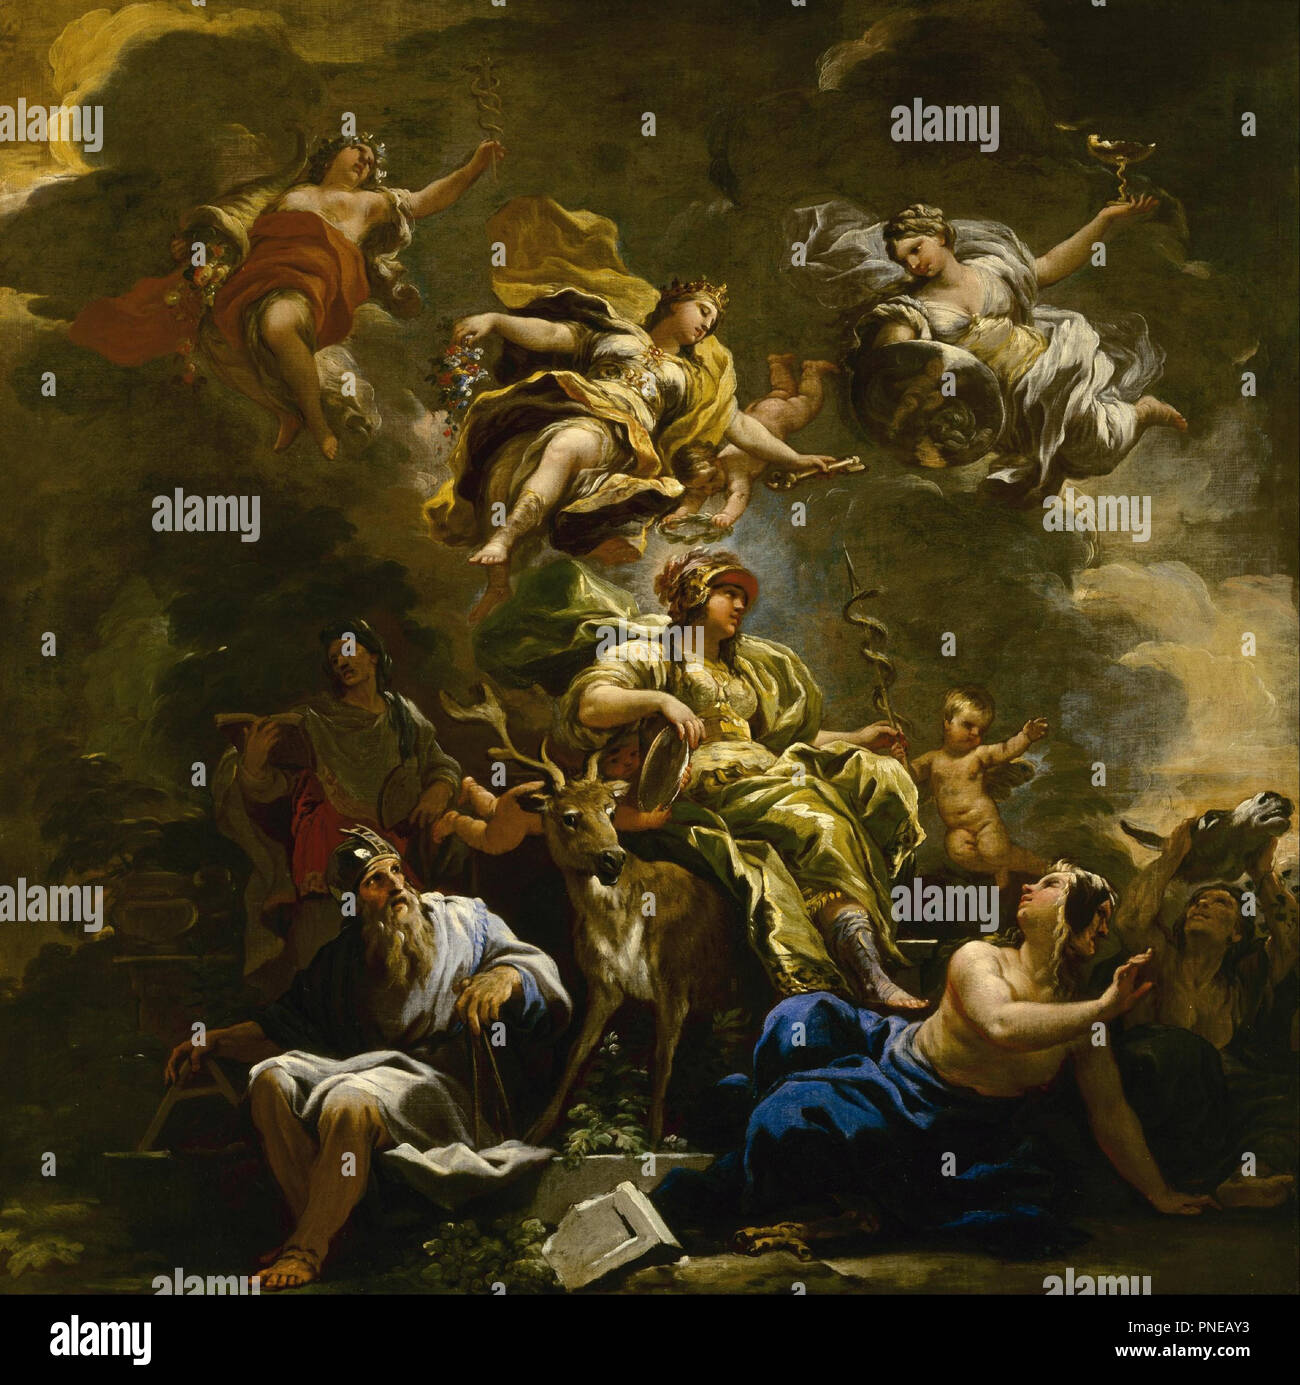 Allegory of Prudence. Date/Period: 1680/1684. Painting. Oil on canvas. Width: 92.9 cm. Height: 92.9 cm (without frame). Author: LUCA GIORDANO. Stock Photo